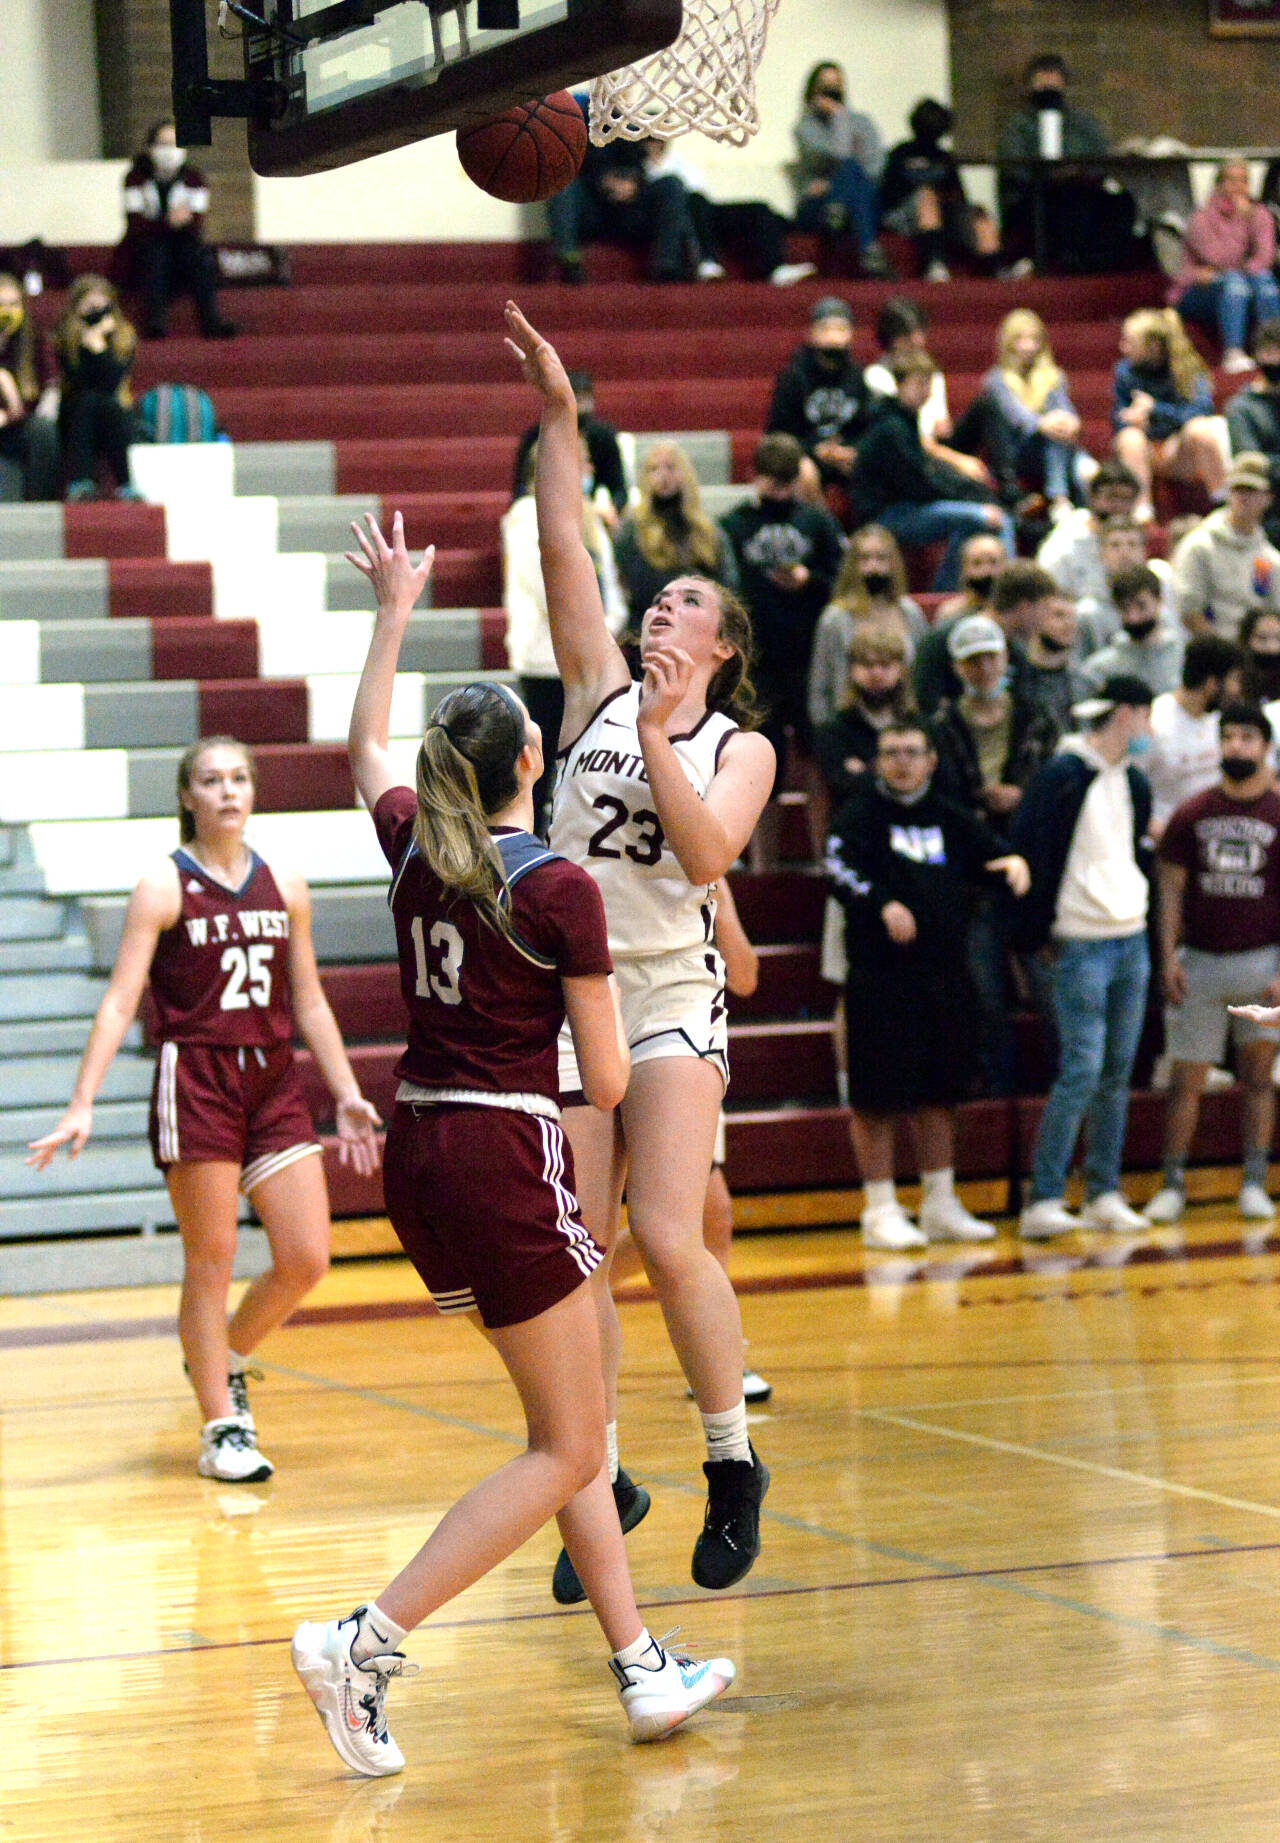 RYAN SPARKS | THE DAILY WORLD Montesano senior Paige Lisherness (23) scores from the post against WF West’s Drew Brumfield during Monte’s 48-29 loss on Tuesday at Montesano High School.